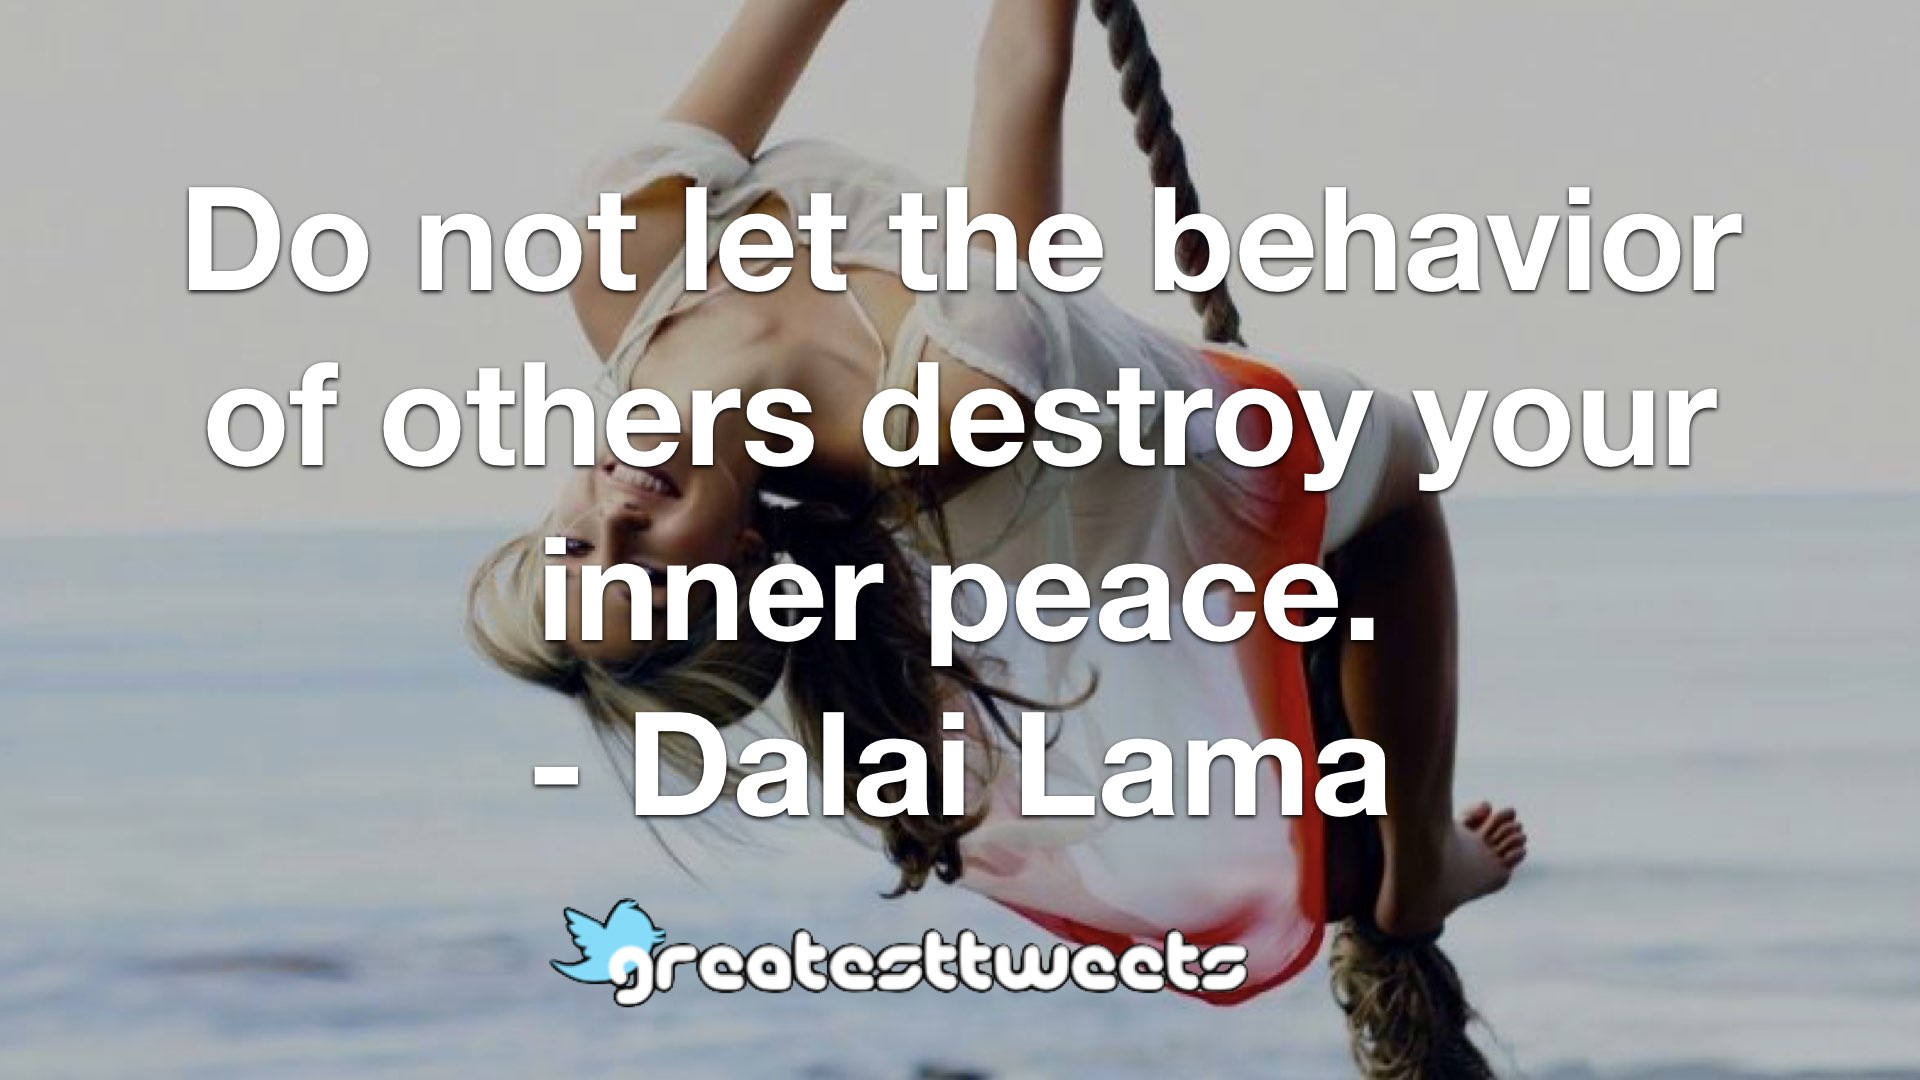 dalai lama quotes do not let the behavior of others